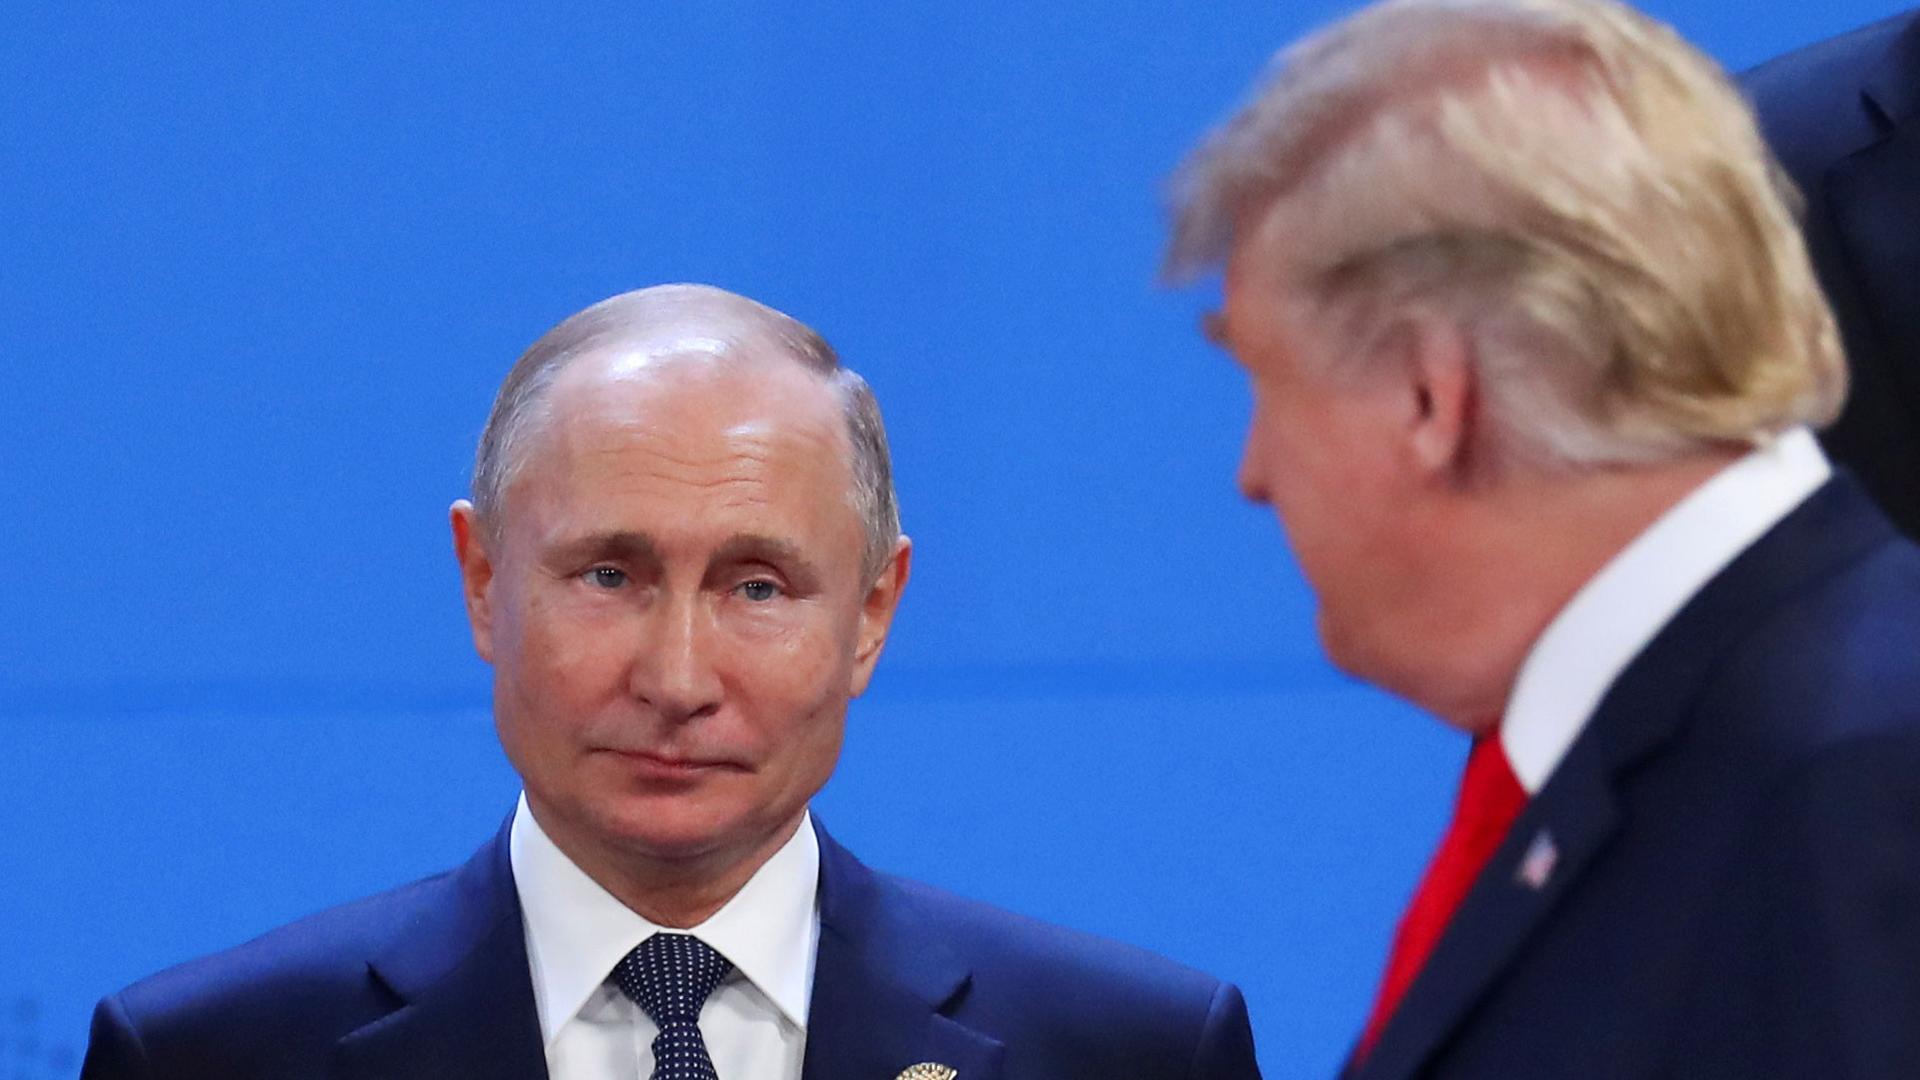 US President Donald Trump is shown out of focus in the near ground with Russia's President Vladimir Putin seen in focus in the background.